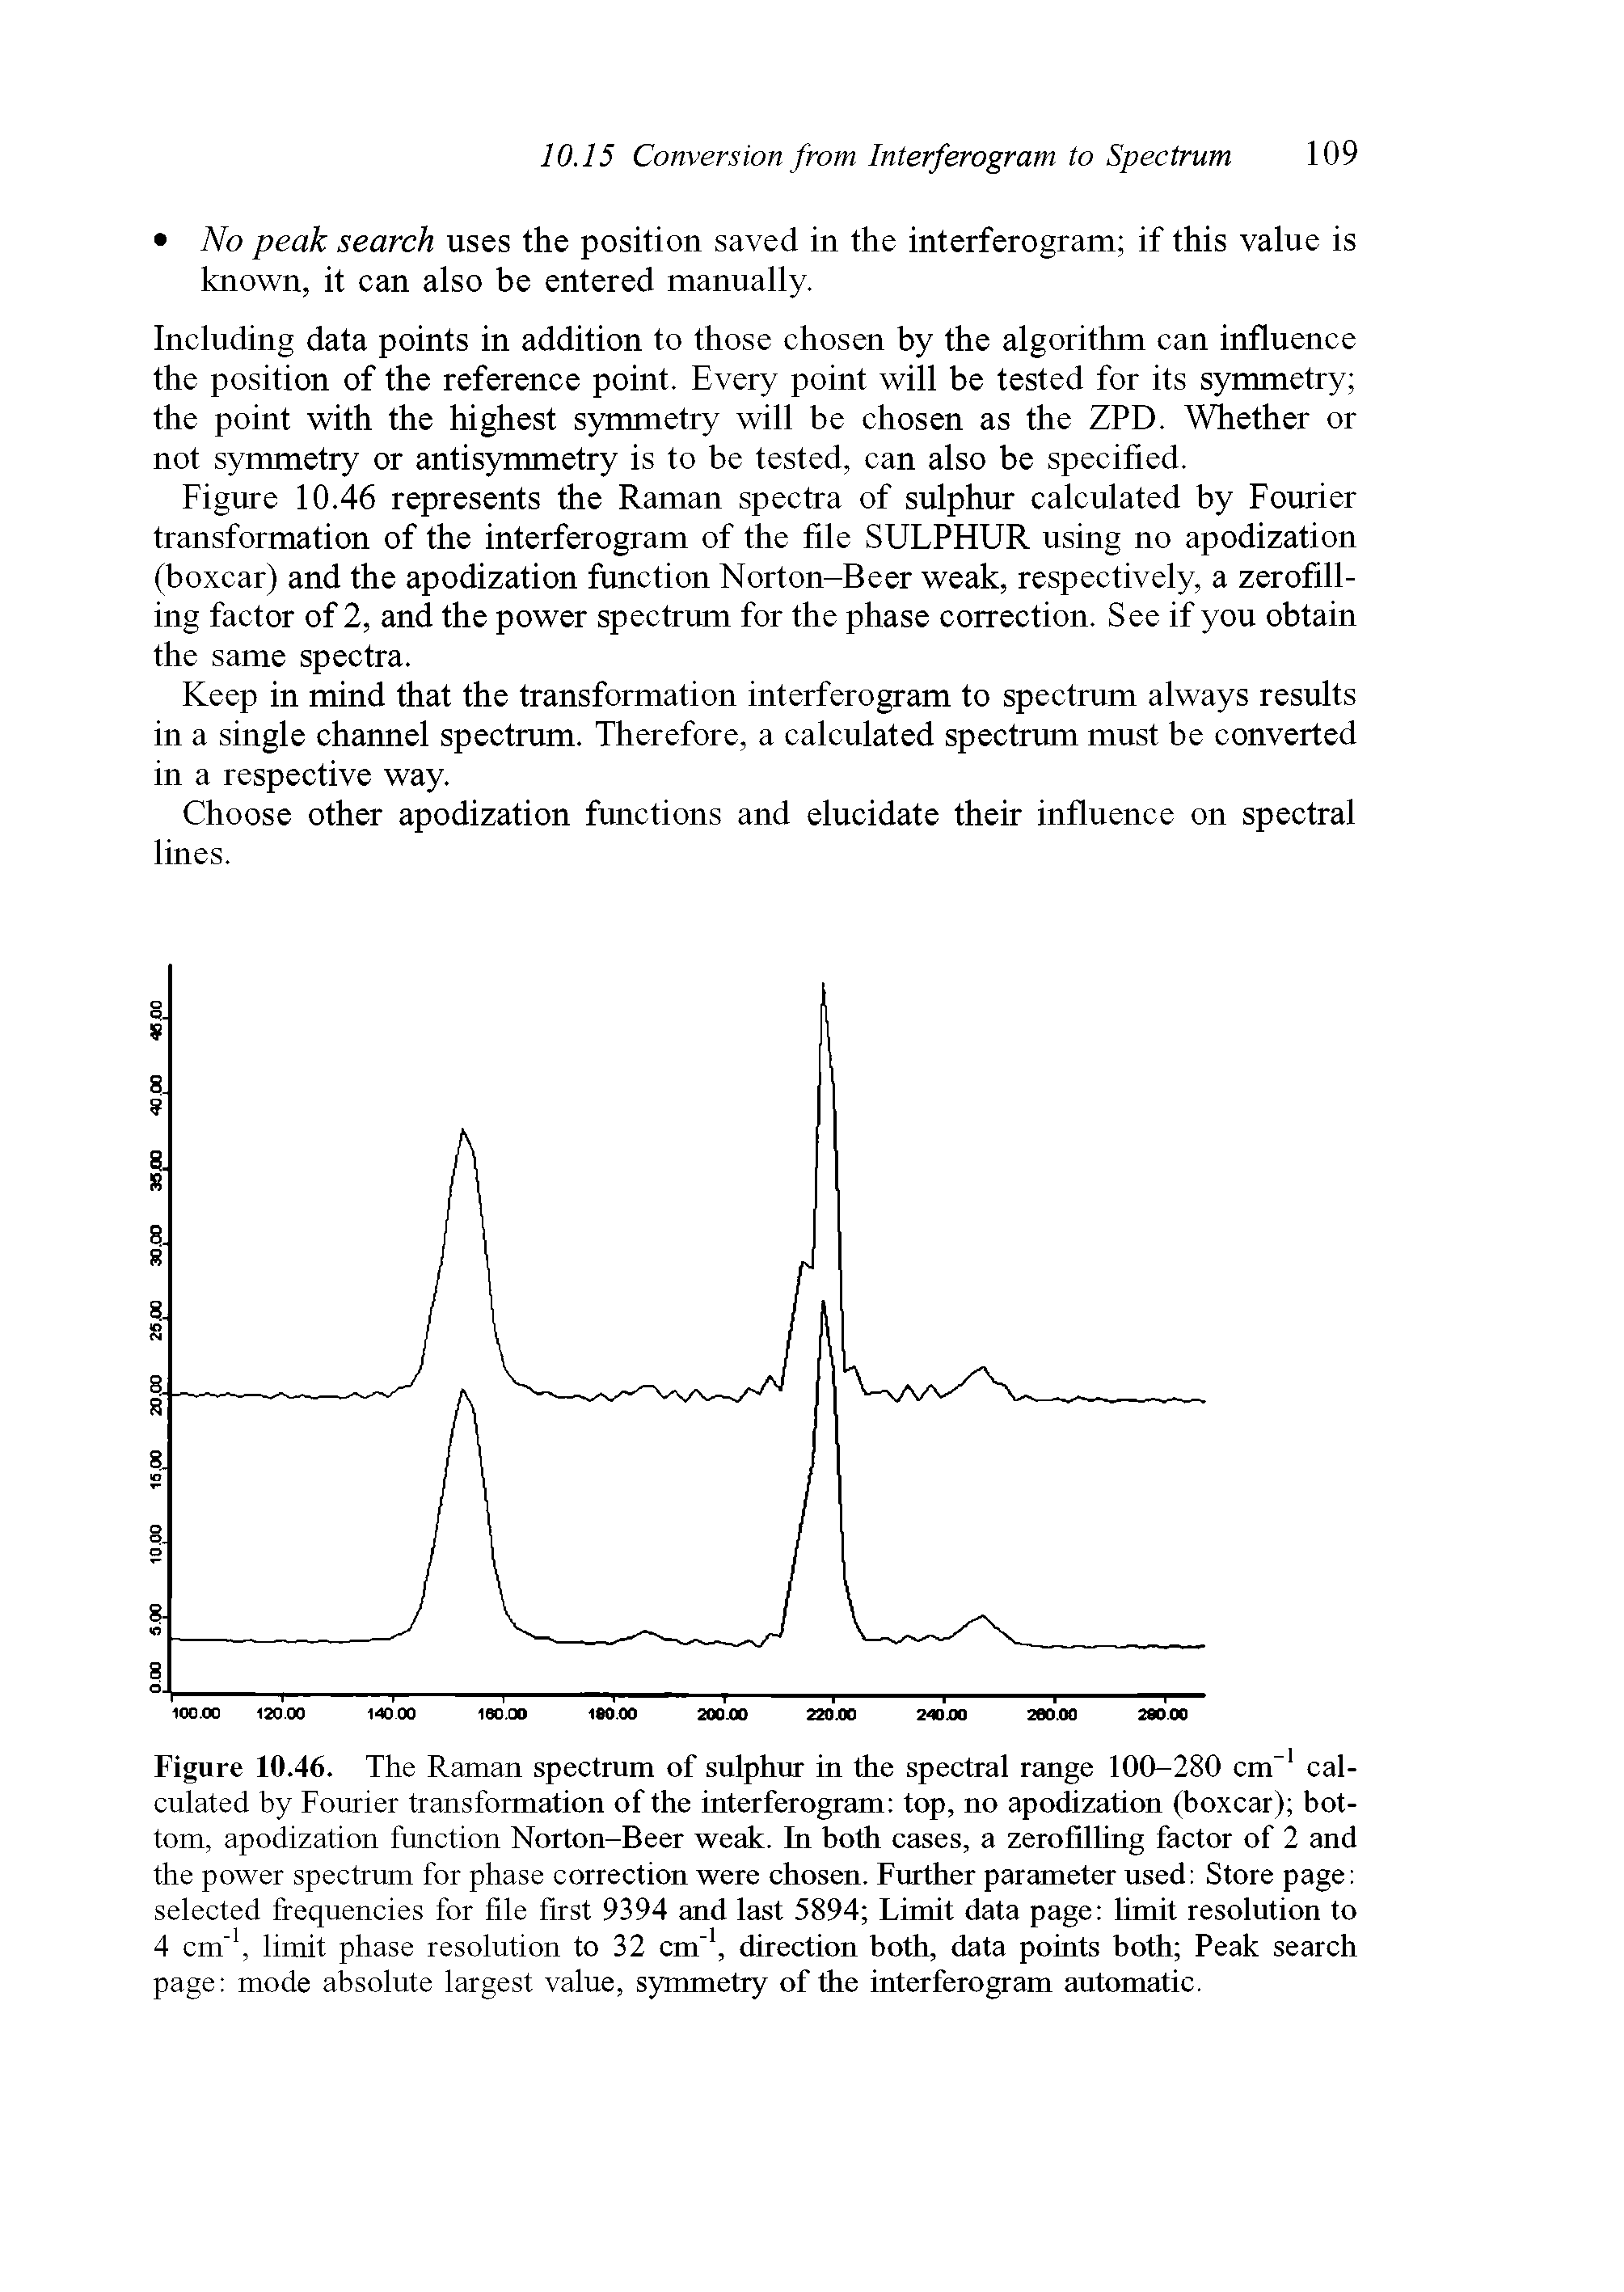 Figure 10.46. The Raman spectrum of sulphur in the spectral range 100-280 cm calculated by Fourier transformation of the interferogram top, no apodization (boxcar) bottom, apodization function Norton-Beer weak. In both cases, a zerofilling factor of 2 and the power spectrum for phase correction were chosen. Further parameter used Store page selected frequencies for file first 9394 and last 5894 Limit data page limit resolution to 4 cm, limit phase resolution to 32 cm, direction both, data points both Peak search page mode absolute largest value, symmetry of the interferogram automatic.